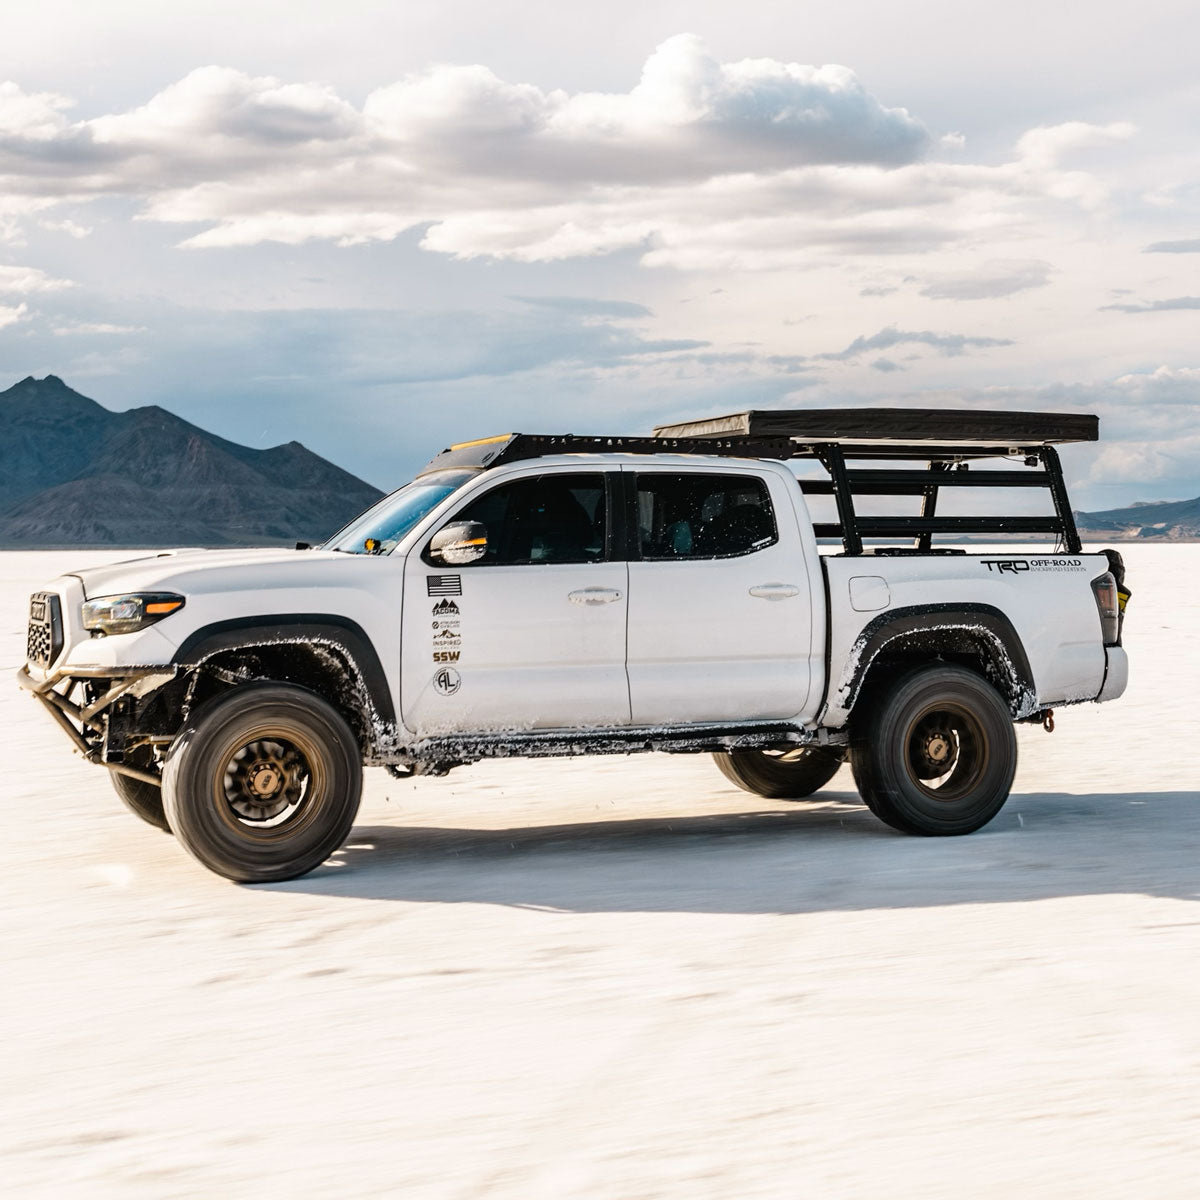 White Toyota Tacoma with XTR1 Bed Rack at the Salt Flats